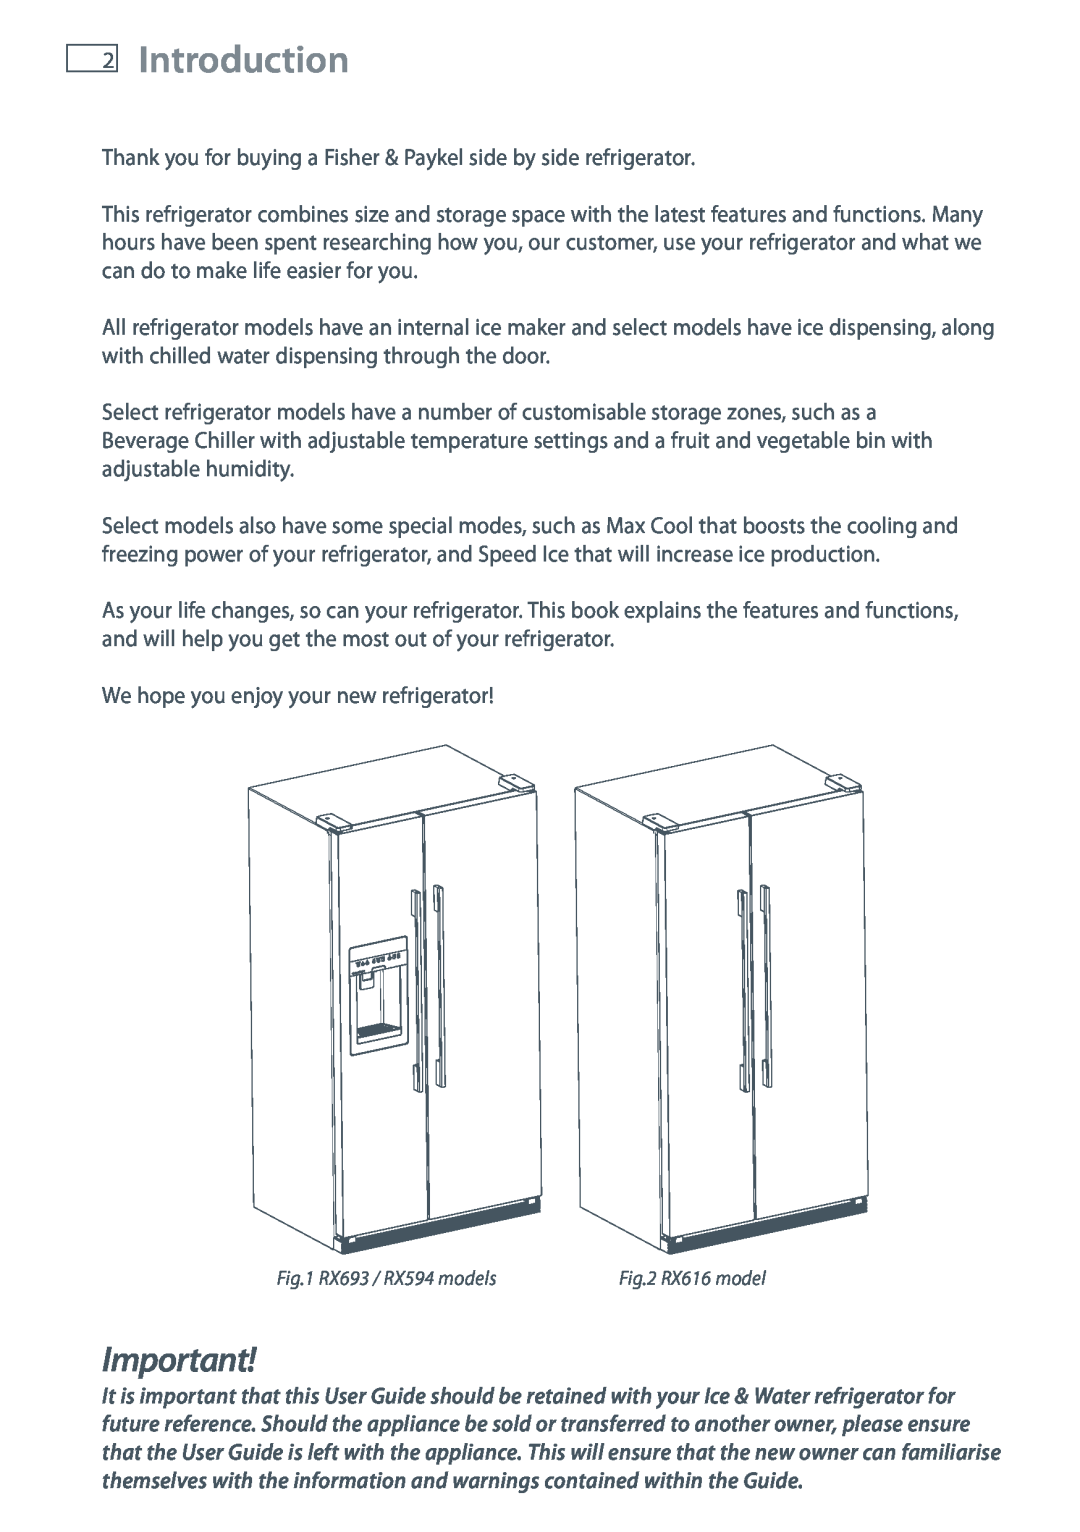 Fisher & Paykel RX616, RX693, RX594 installation instructions Introduction 